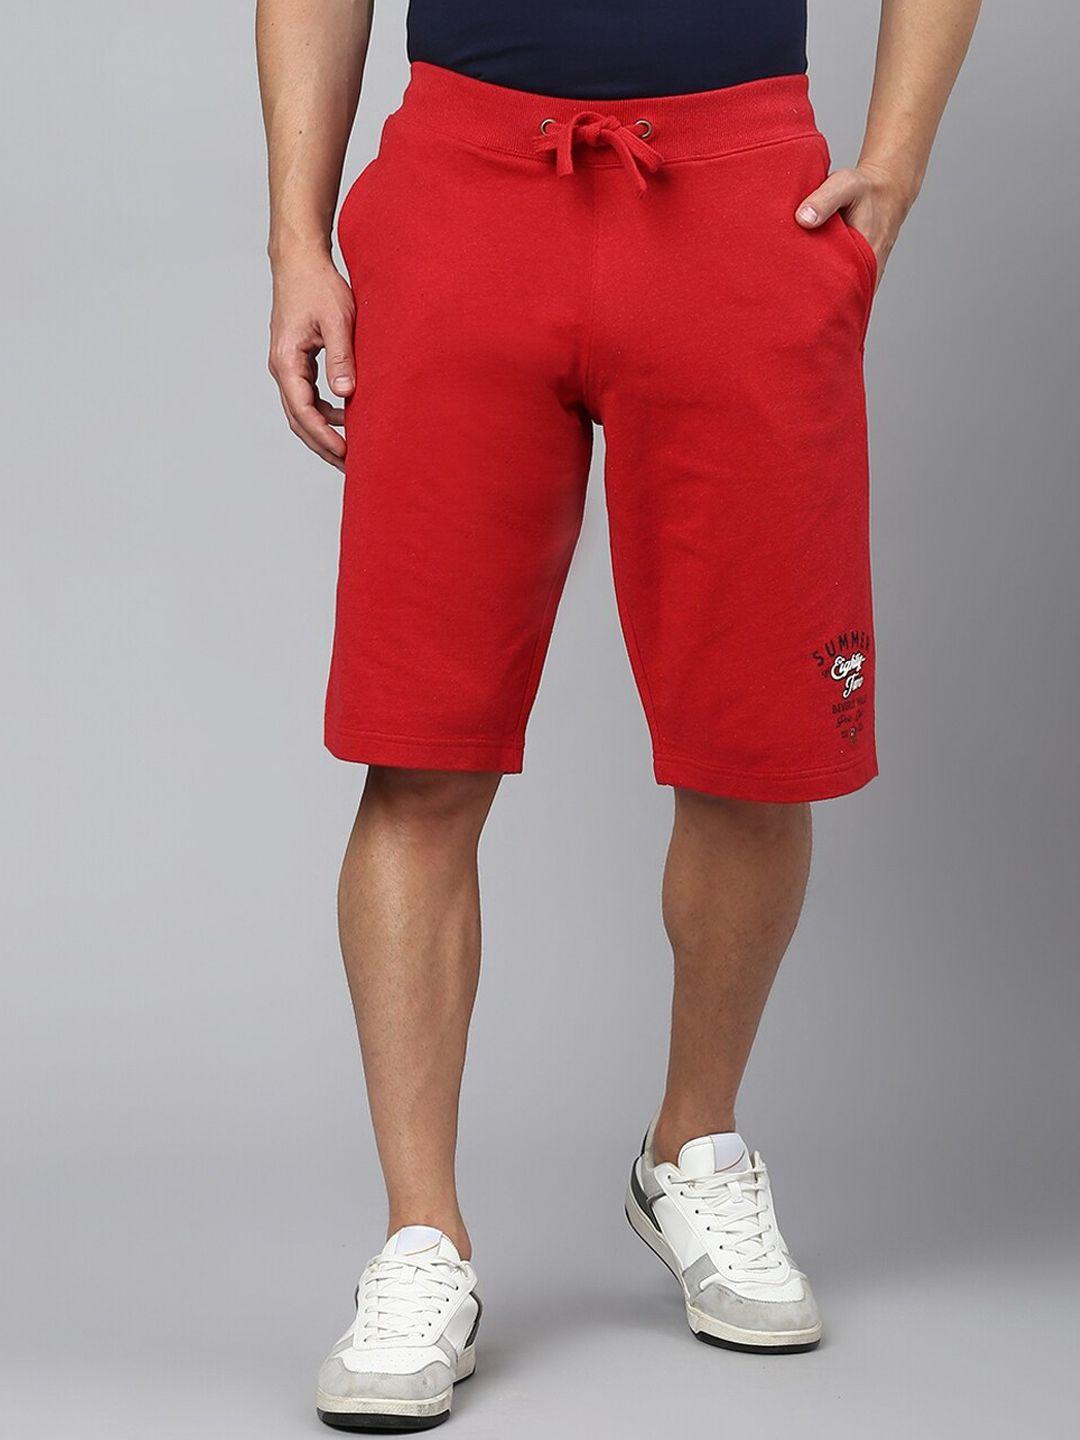 beverly hills polo club men knee length pure cotton shorts